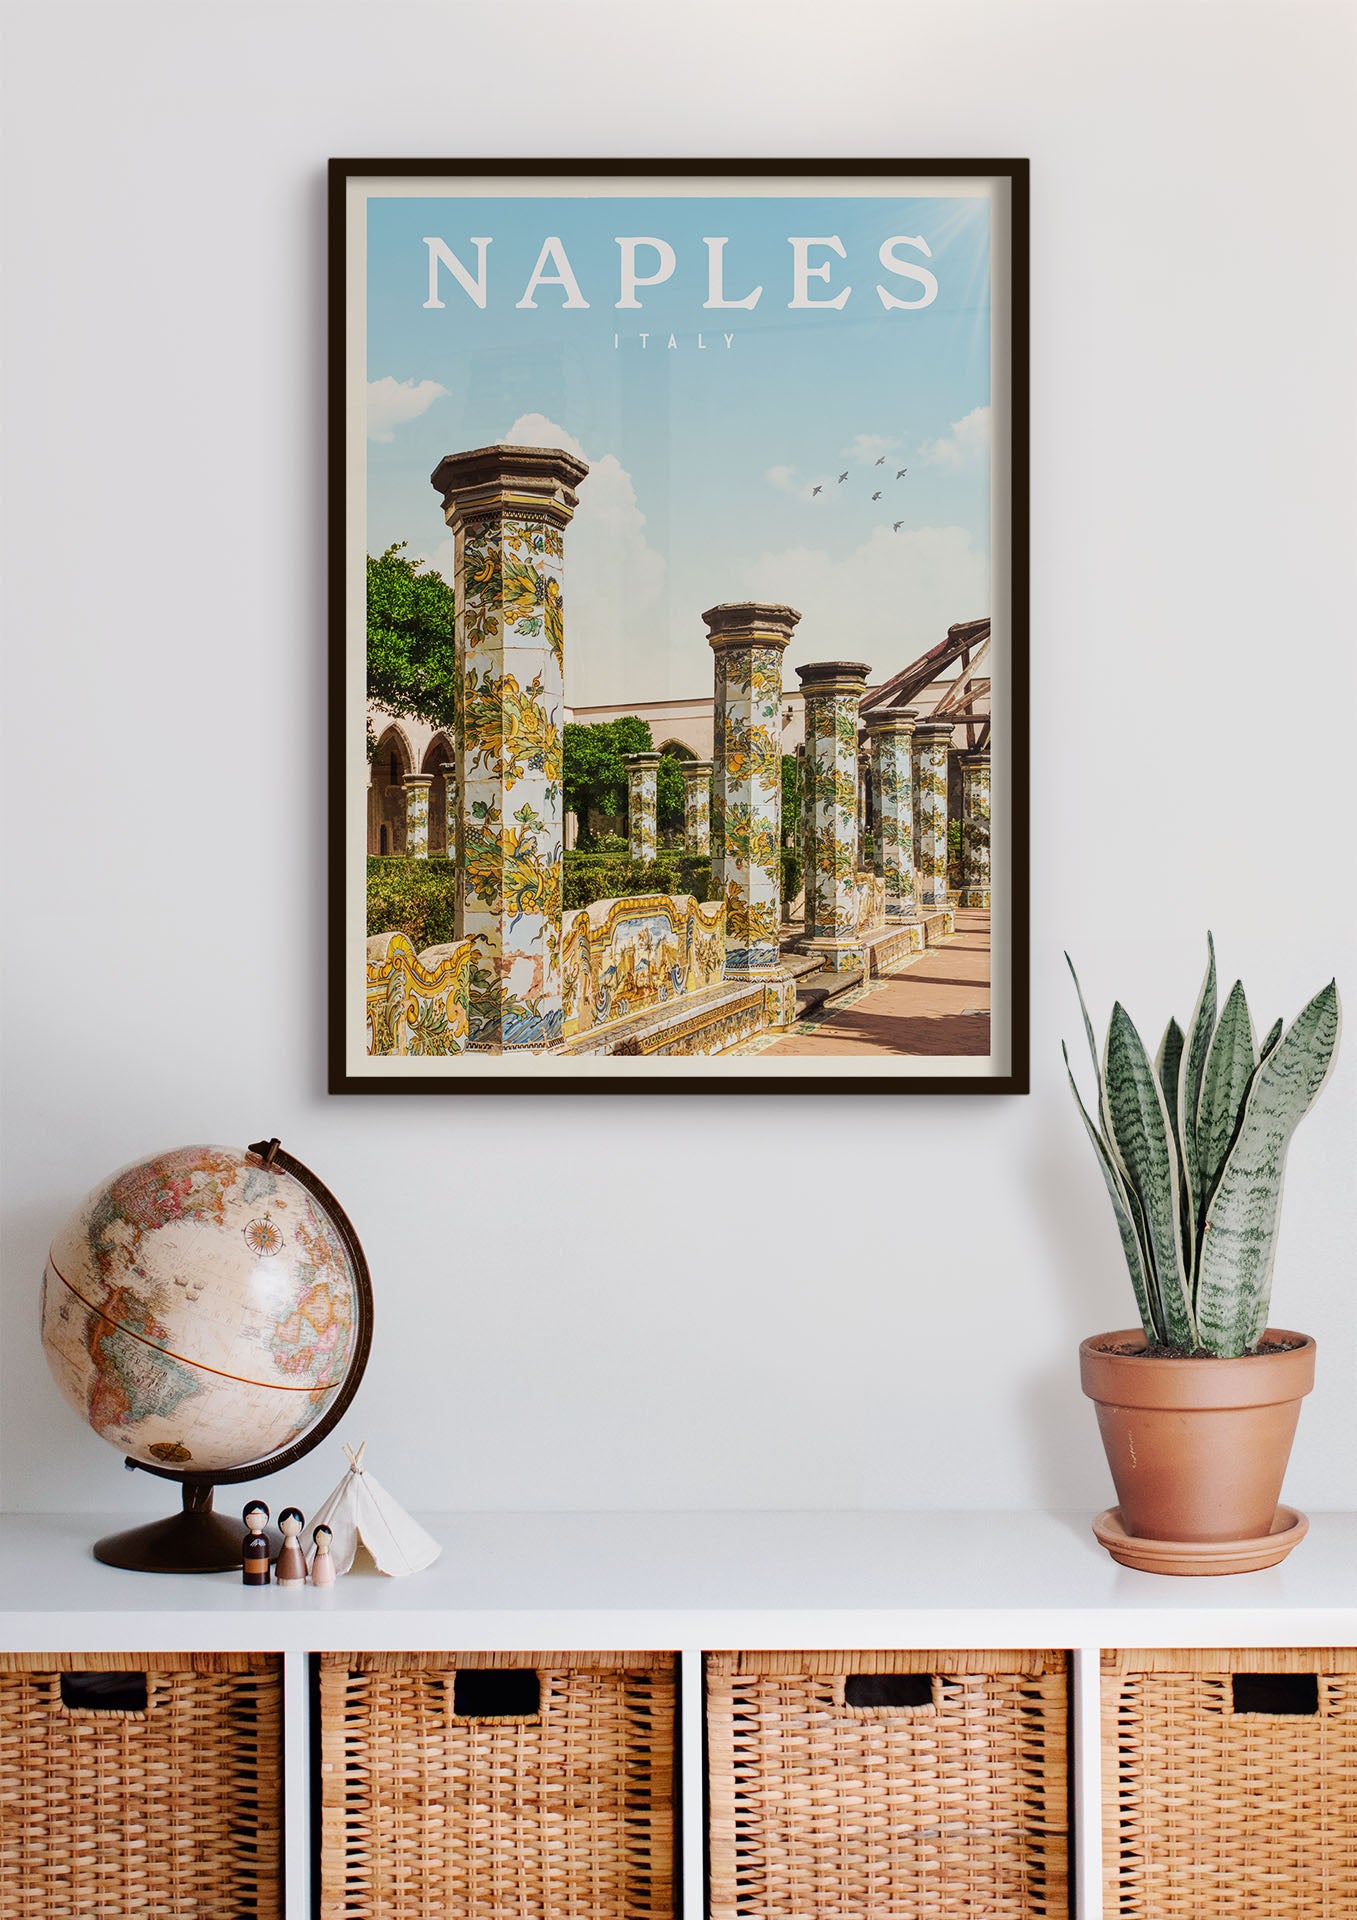 Naples, Italy - Vintage Travel Poster